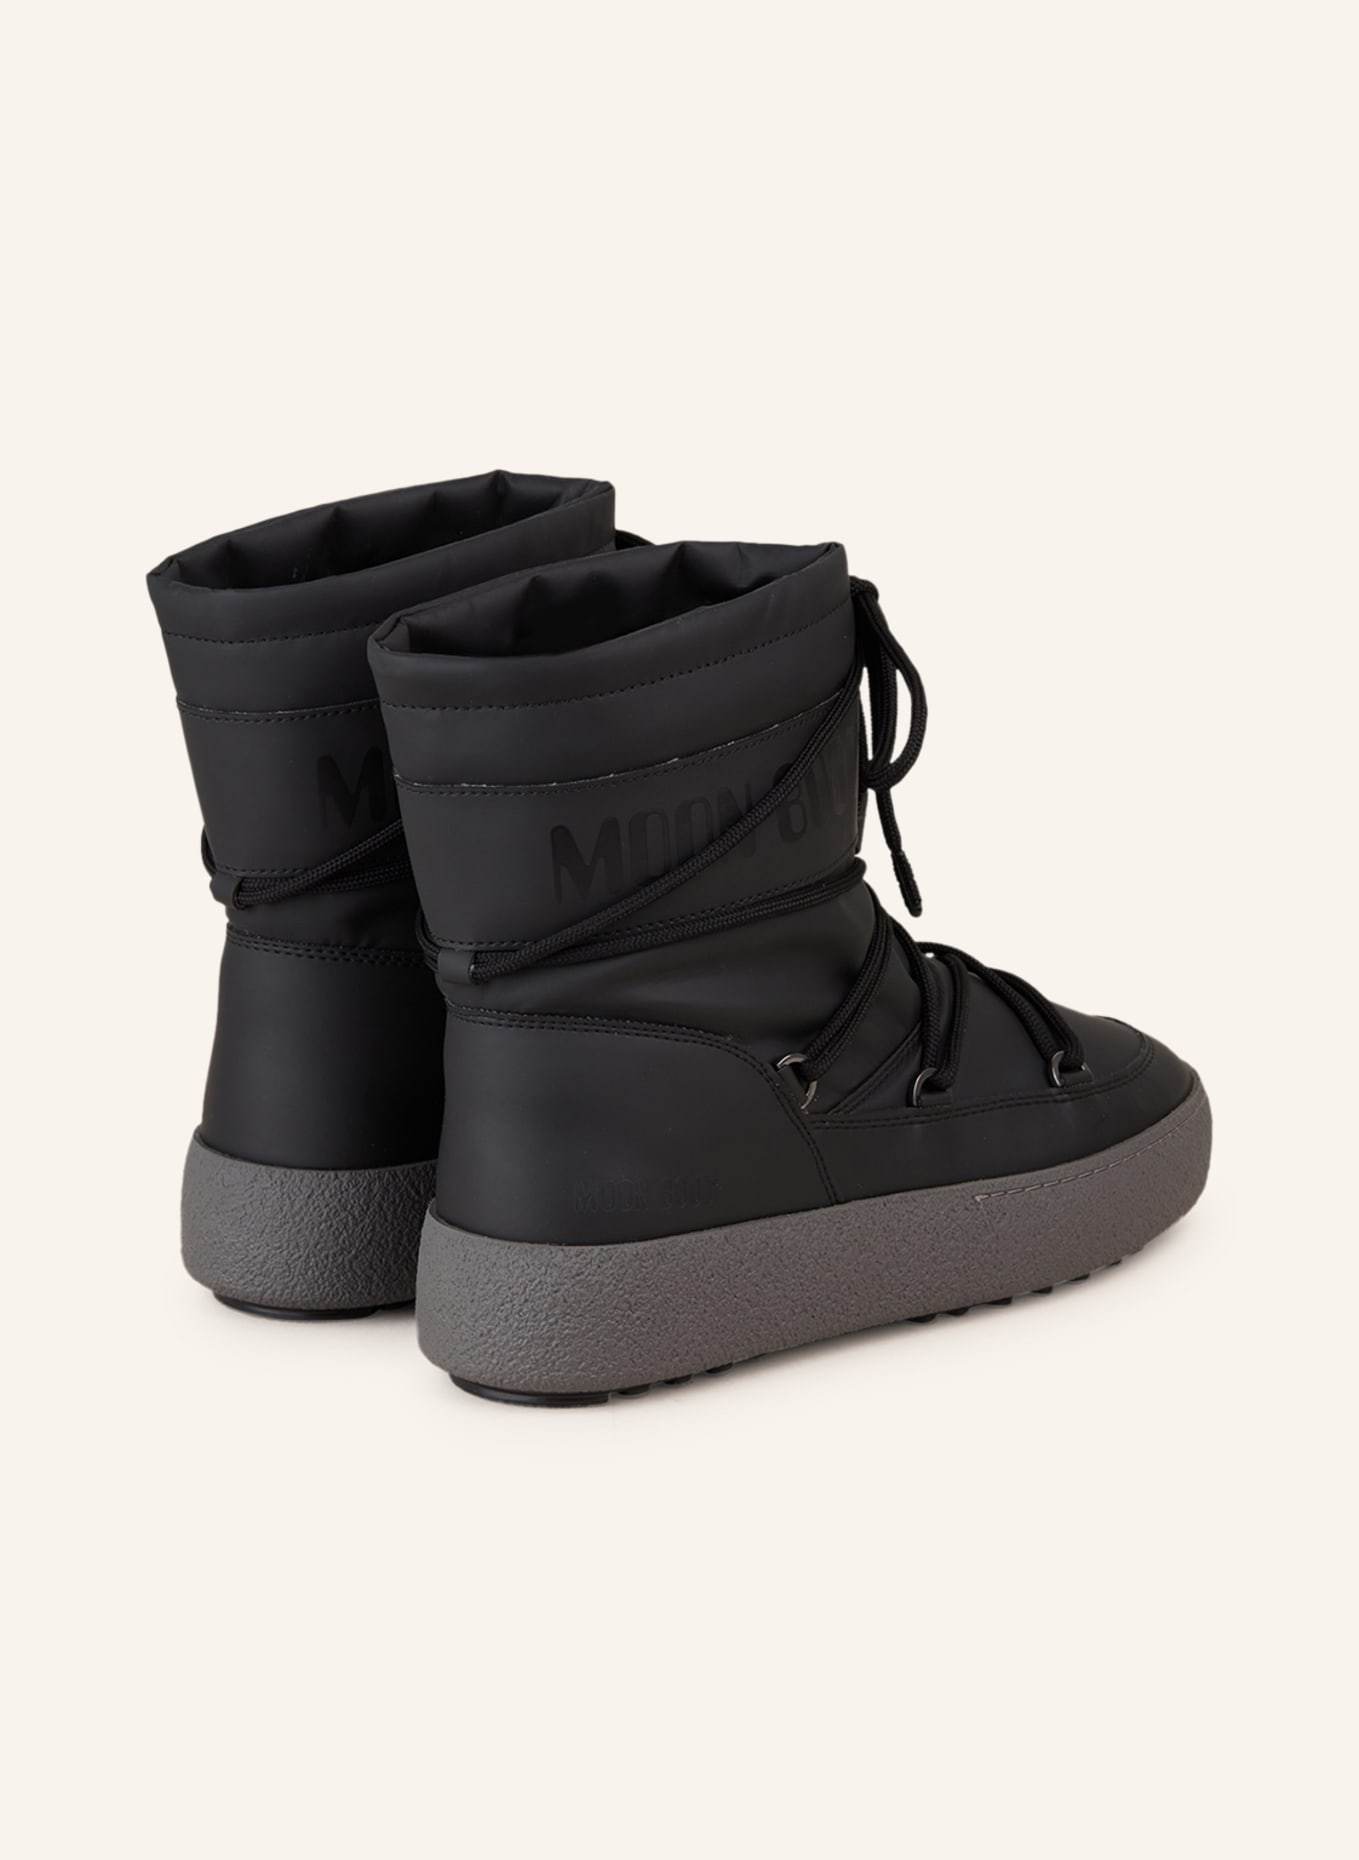 MOON BOOT Moon boots MTRACK in black